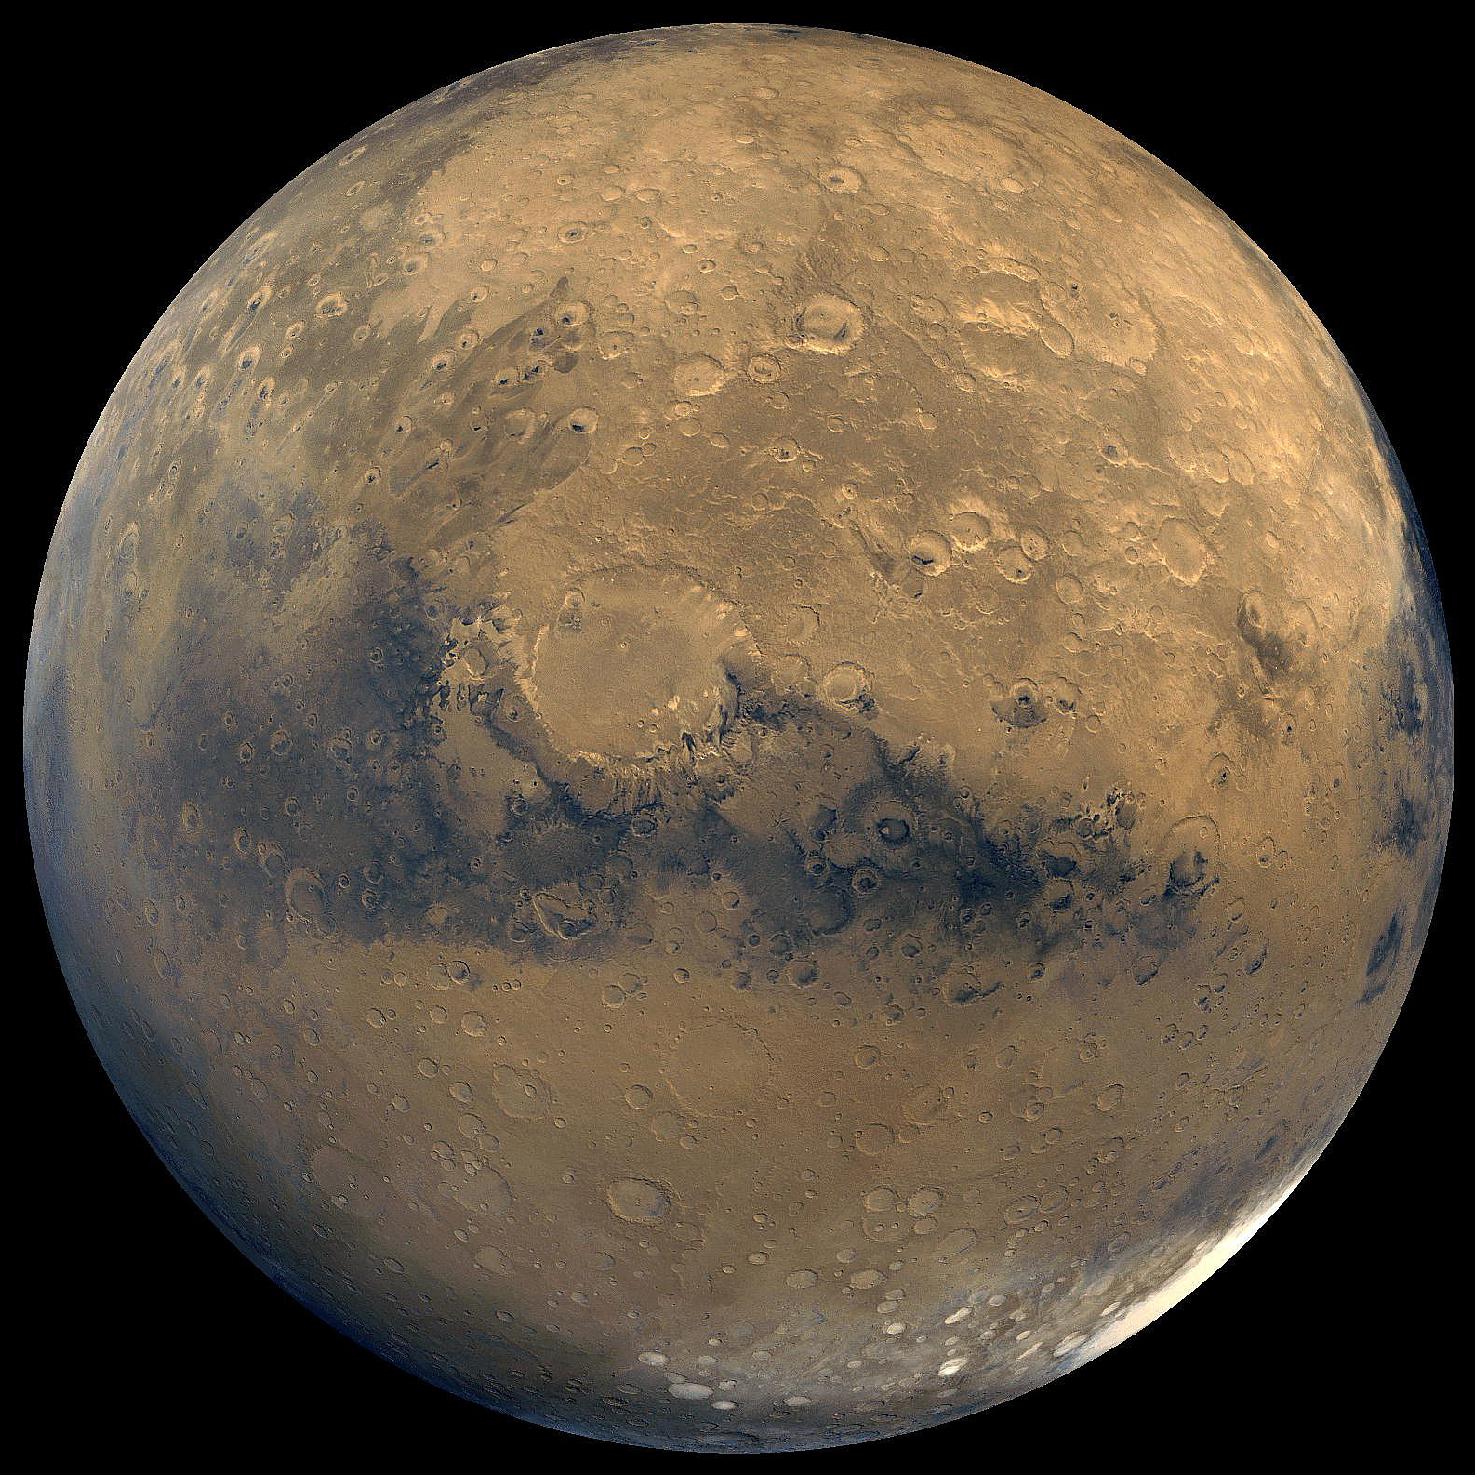 Figure 39: This global view of Mars is composed of about 100 Viking Orbiter images (image credit: NASA/JPL-Caltech/USGS)